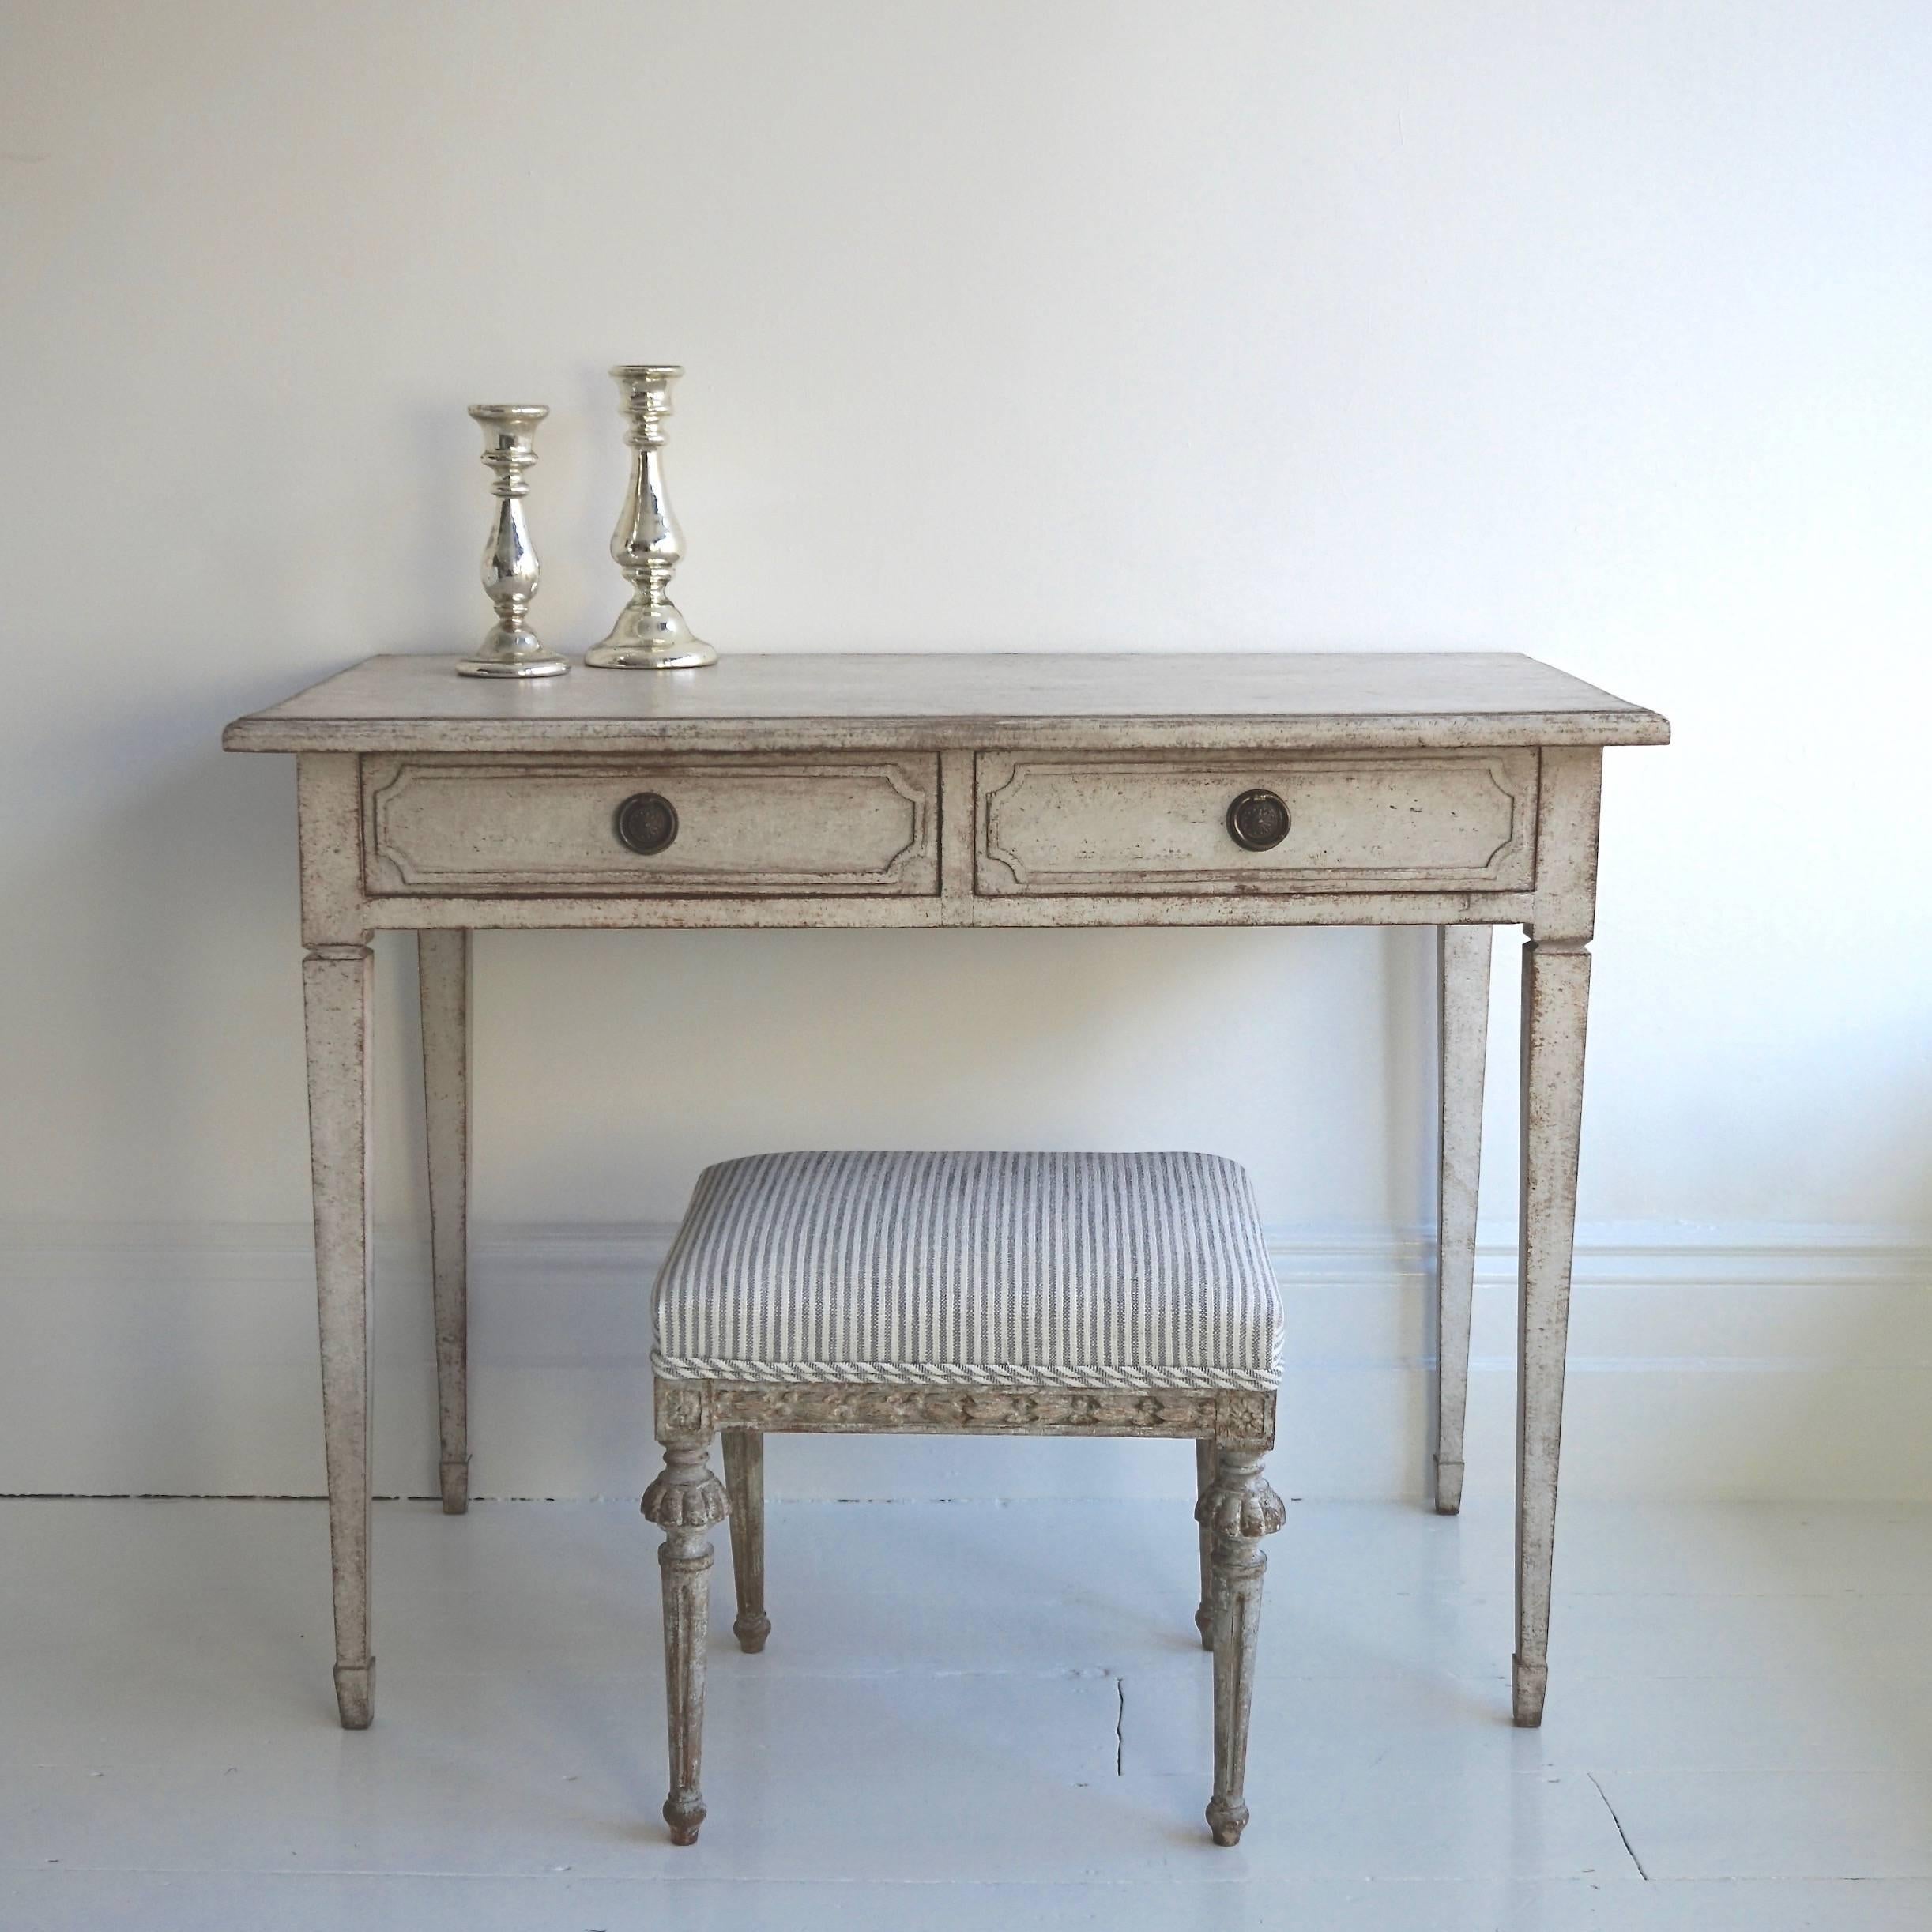 A wonderful Gustavian style desk, or side table with two drawers, standing on very elegant square tapered legs. Would also make a beautiful dressing table, Swedish, circa 1860.

Continental US shipping:
We ship to the United States quickly and